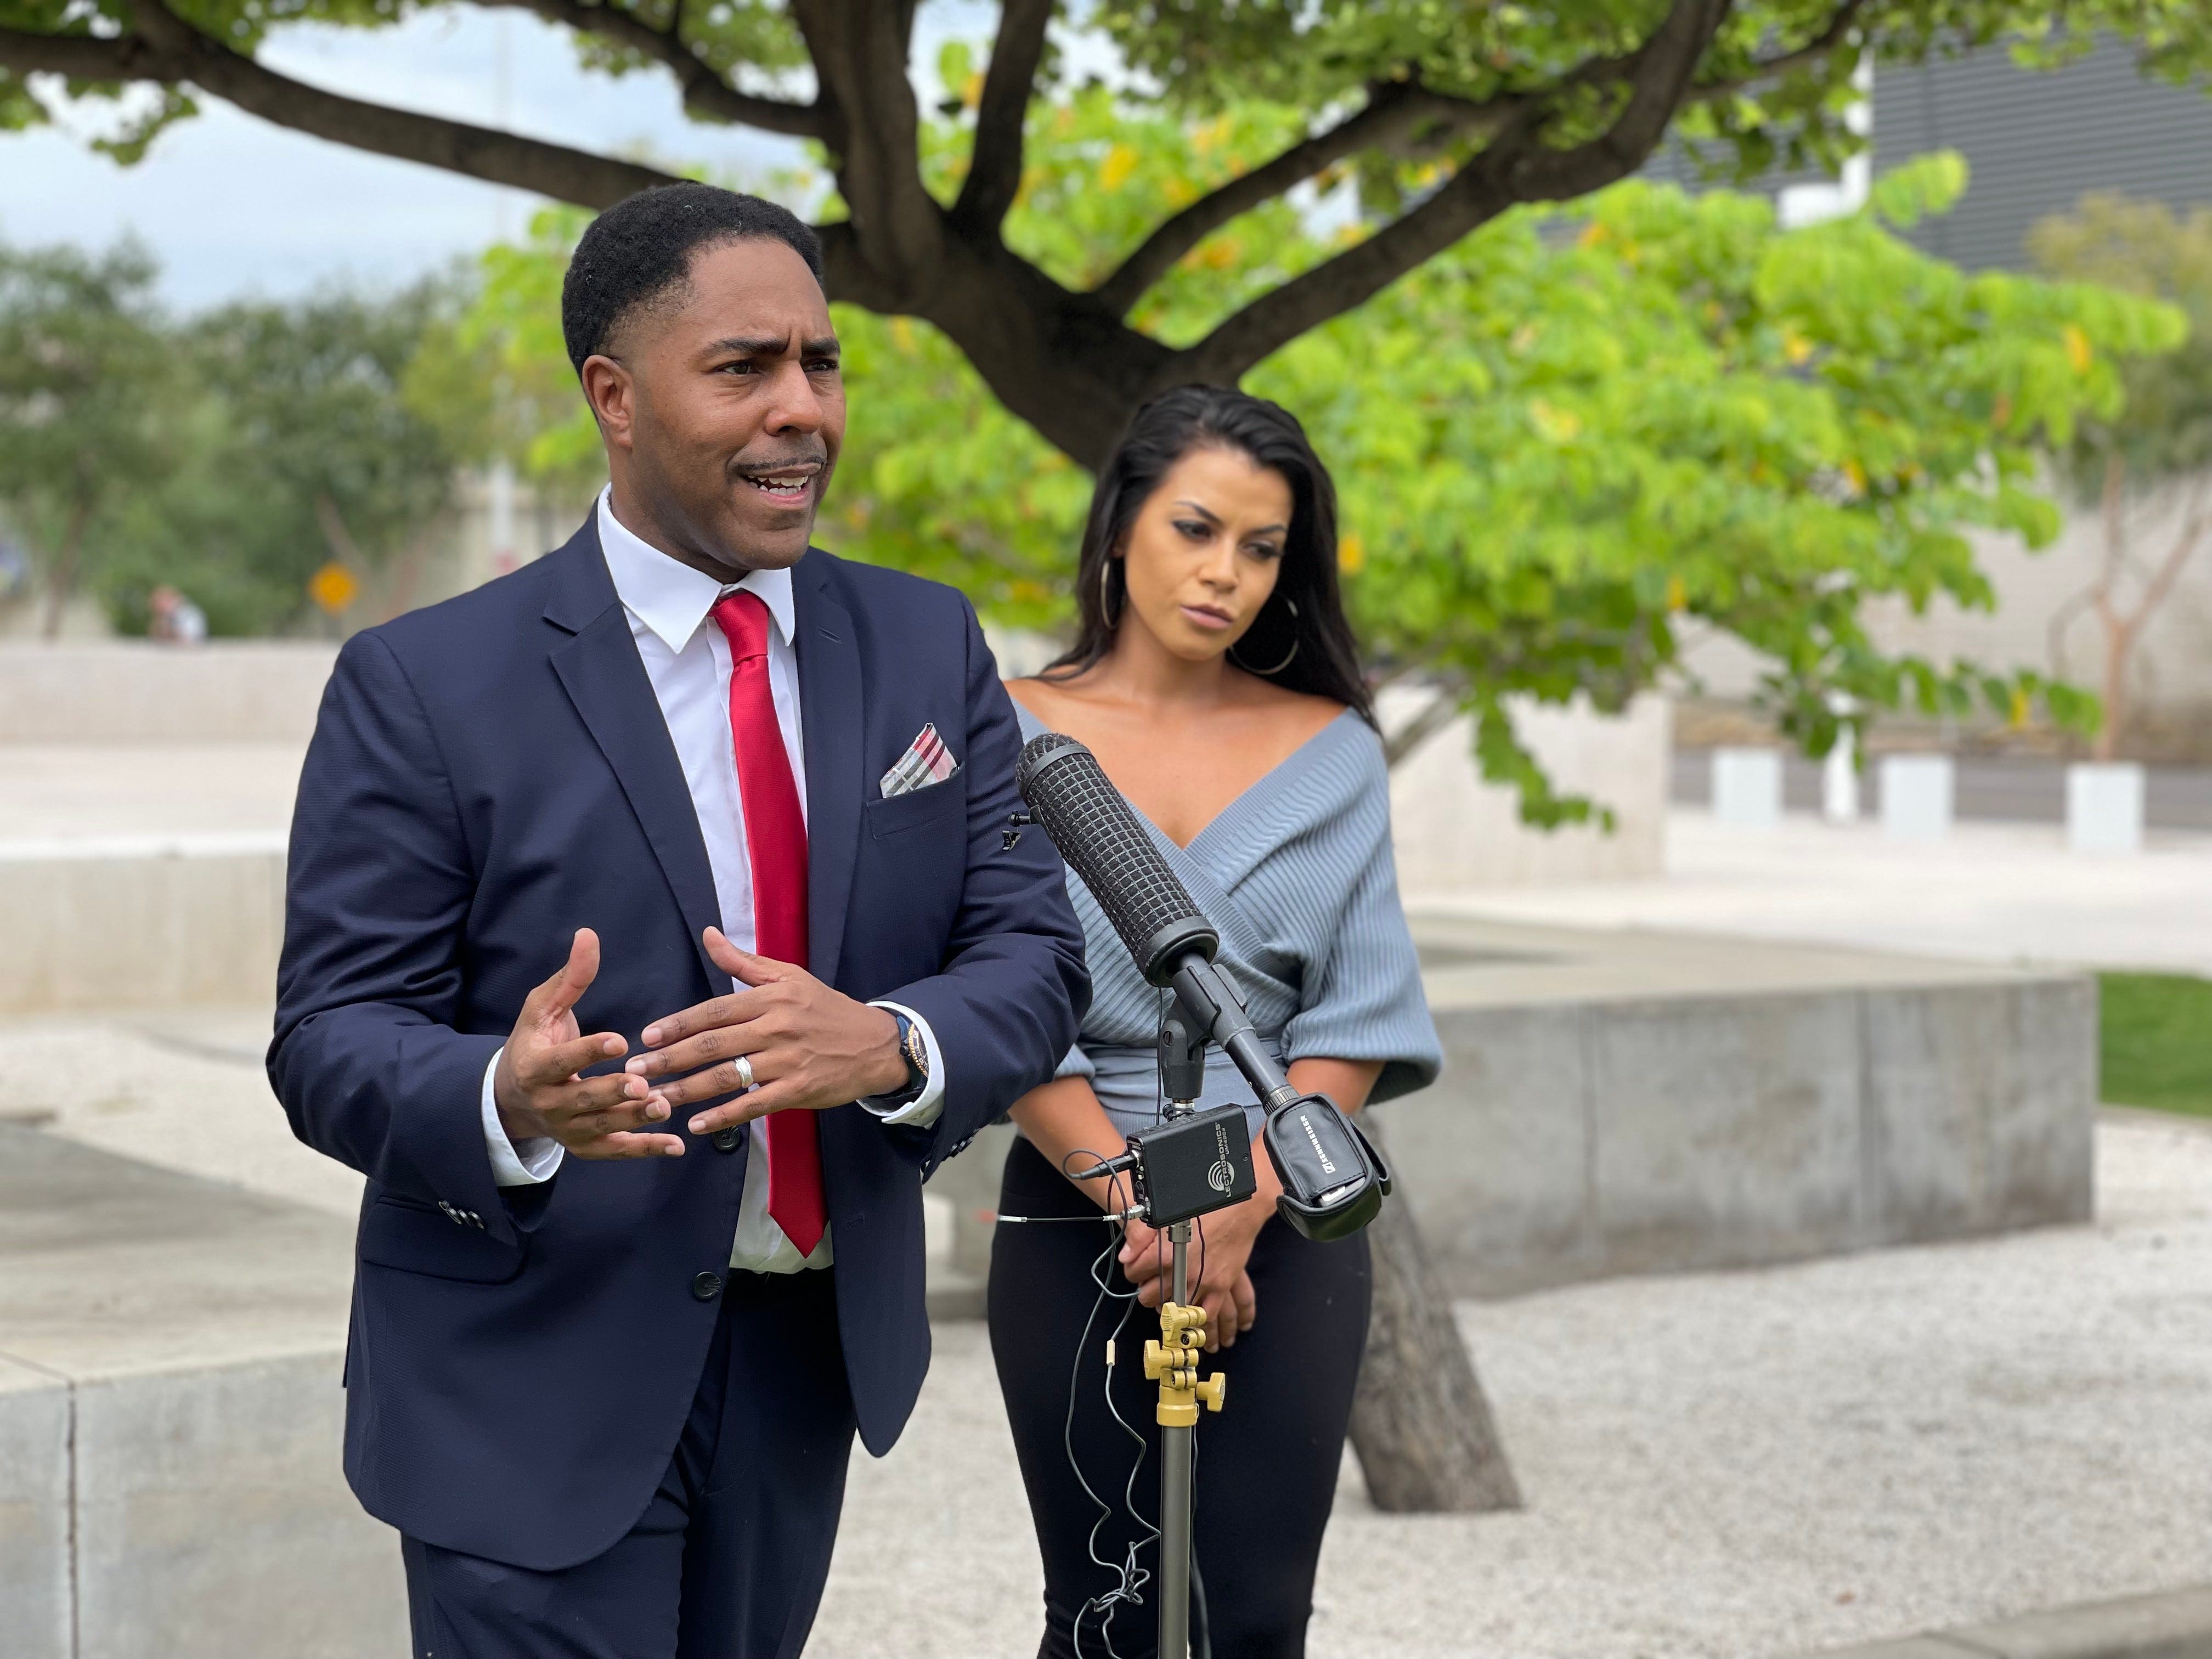 Yessenia Garcia's attorney, Benjamin Taylor, speaks to reporters on Tuesday.